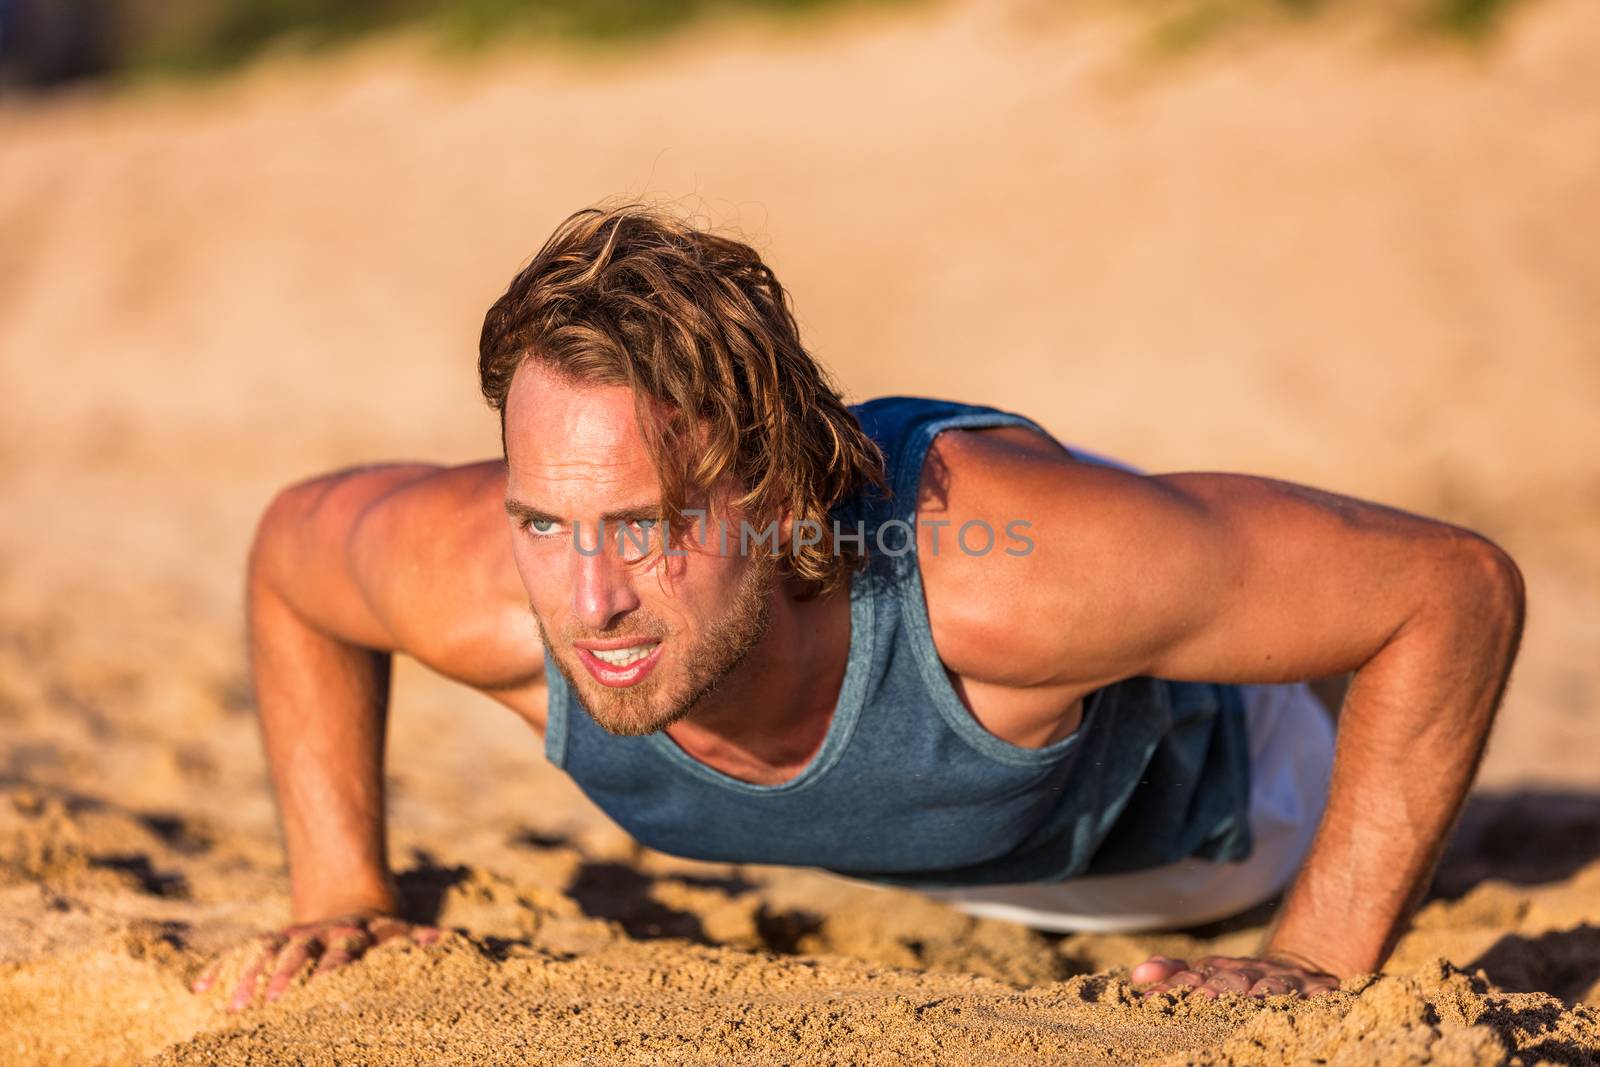 Push-up fitness man training pushups on beach doing bodyweight exercises for arms workout. Healthy lifestyle person working out muscles.